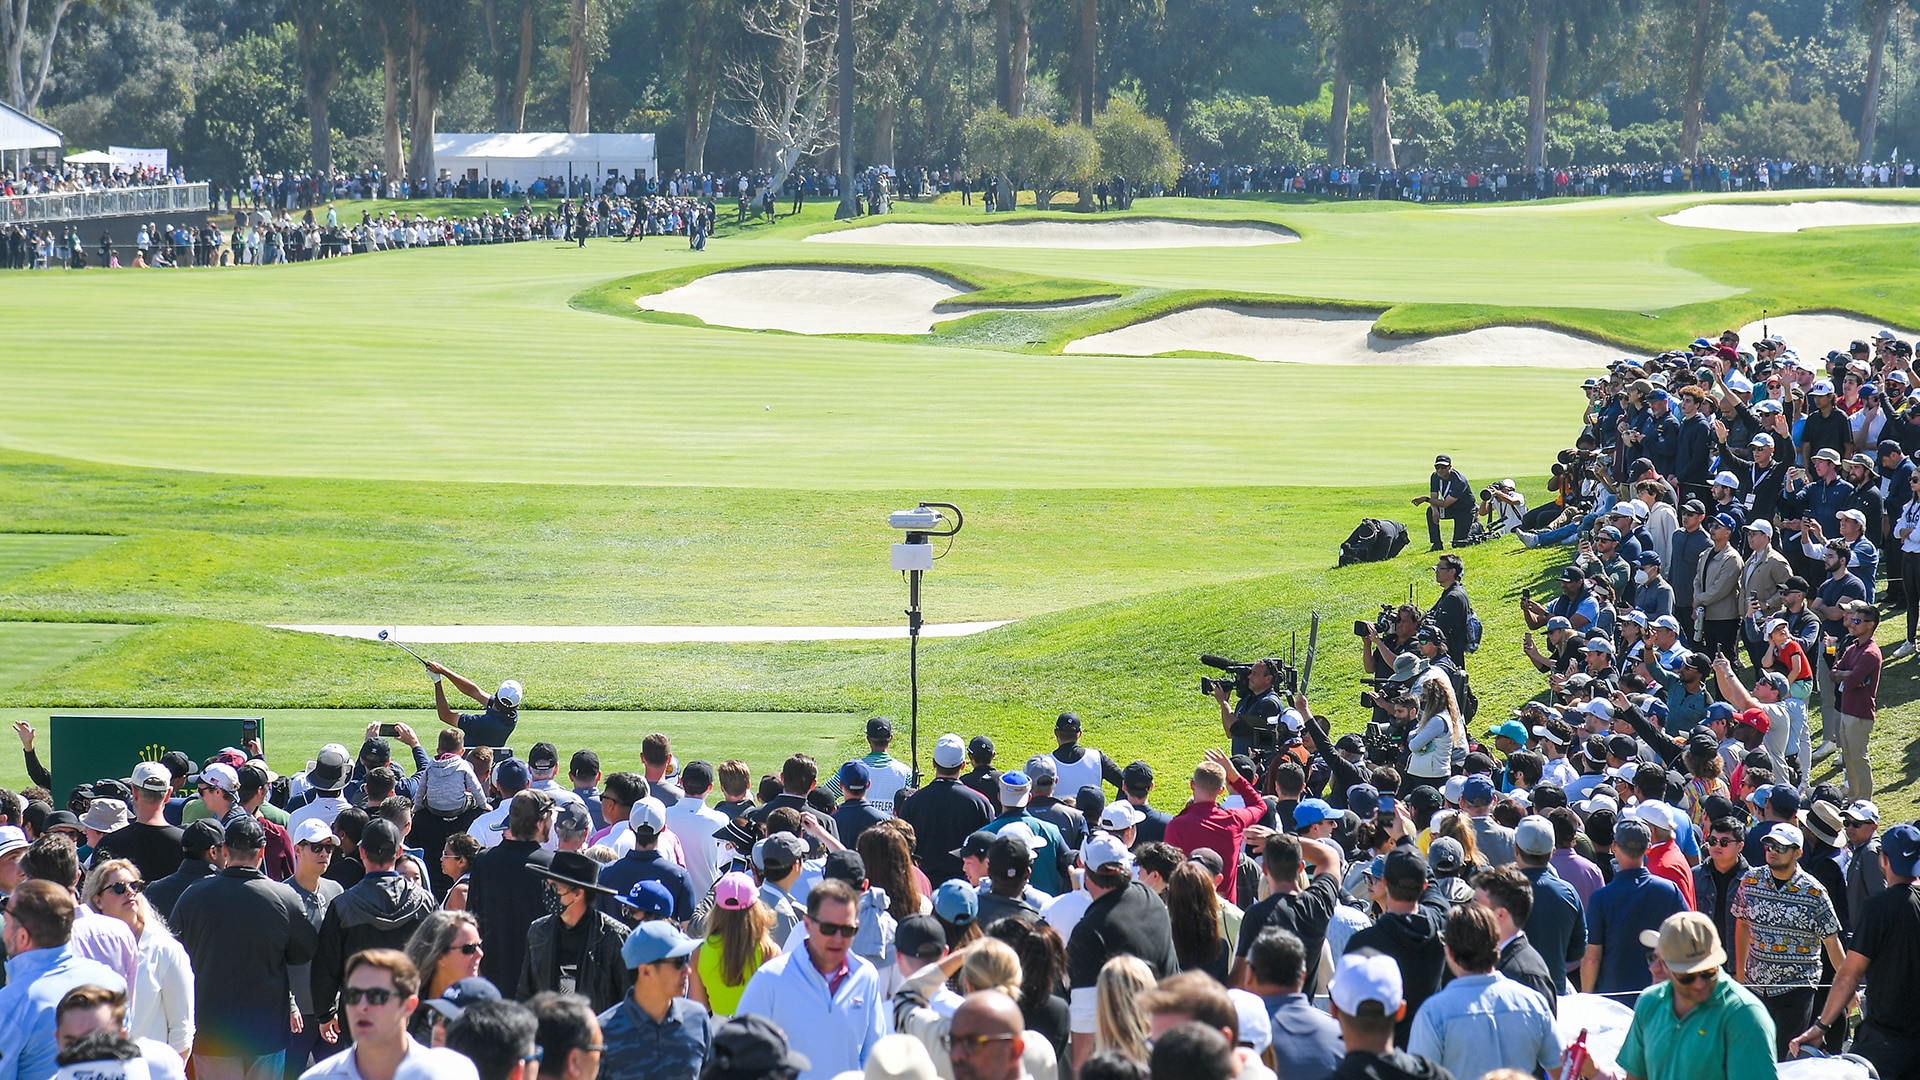 What the numbers say about playing the par-4 10th at Riviera: Go for it!